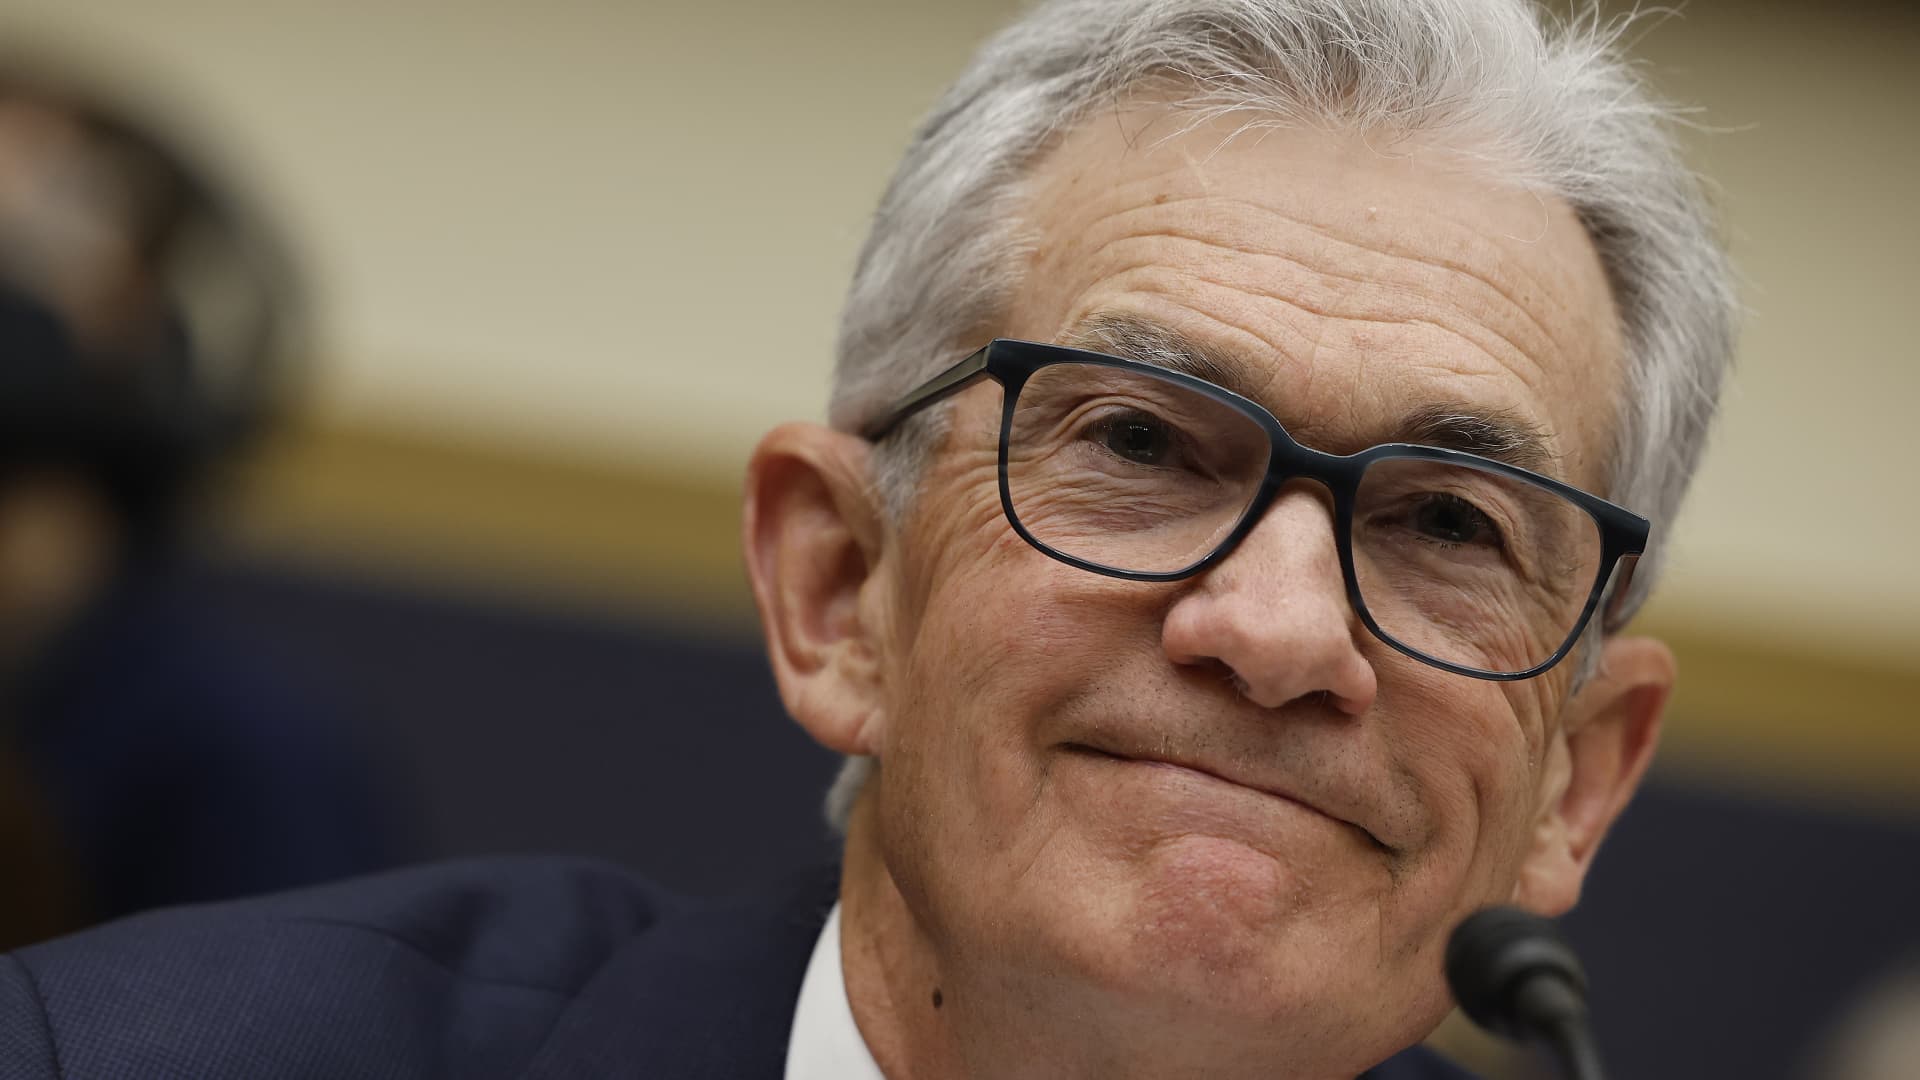 Watch Fed Chairman Powell speak live during a policy forum in Washington